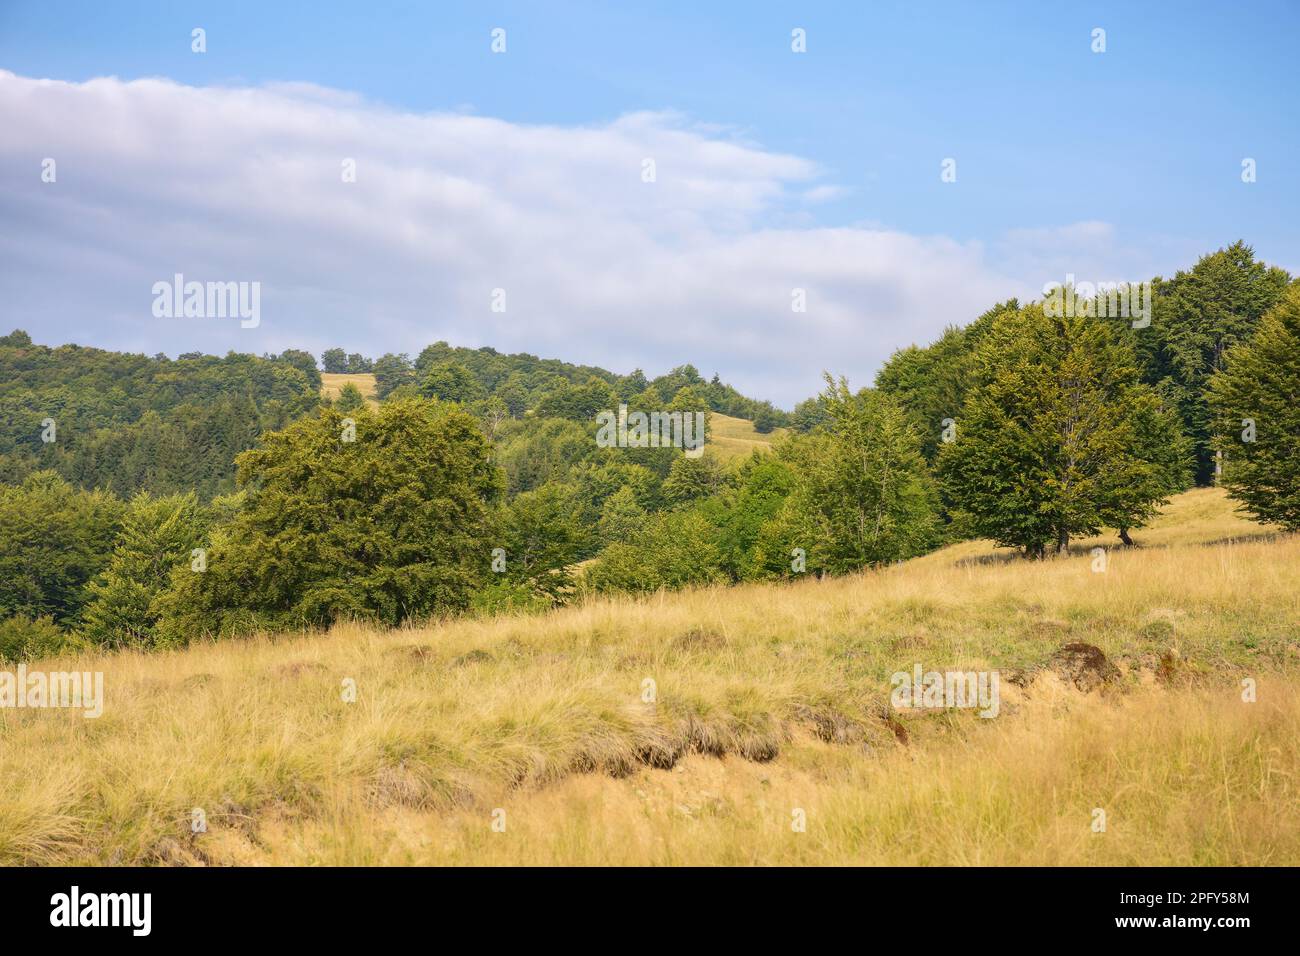 forested landscape of ukrainian mountains. countryside scenery with green beech trees on the grassy hills and meadows in afternoon light Stock Photo